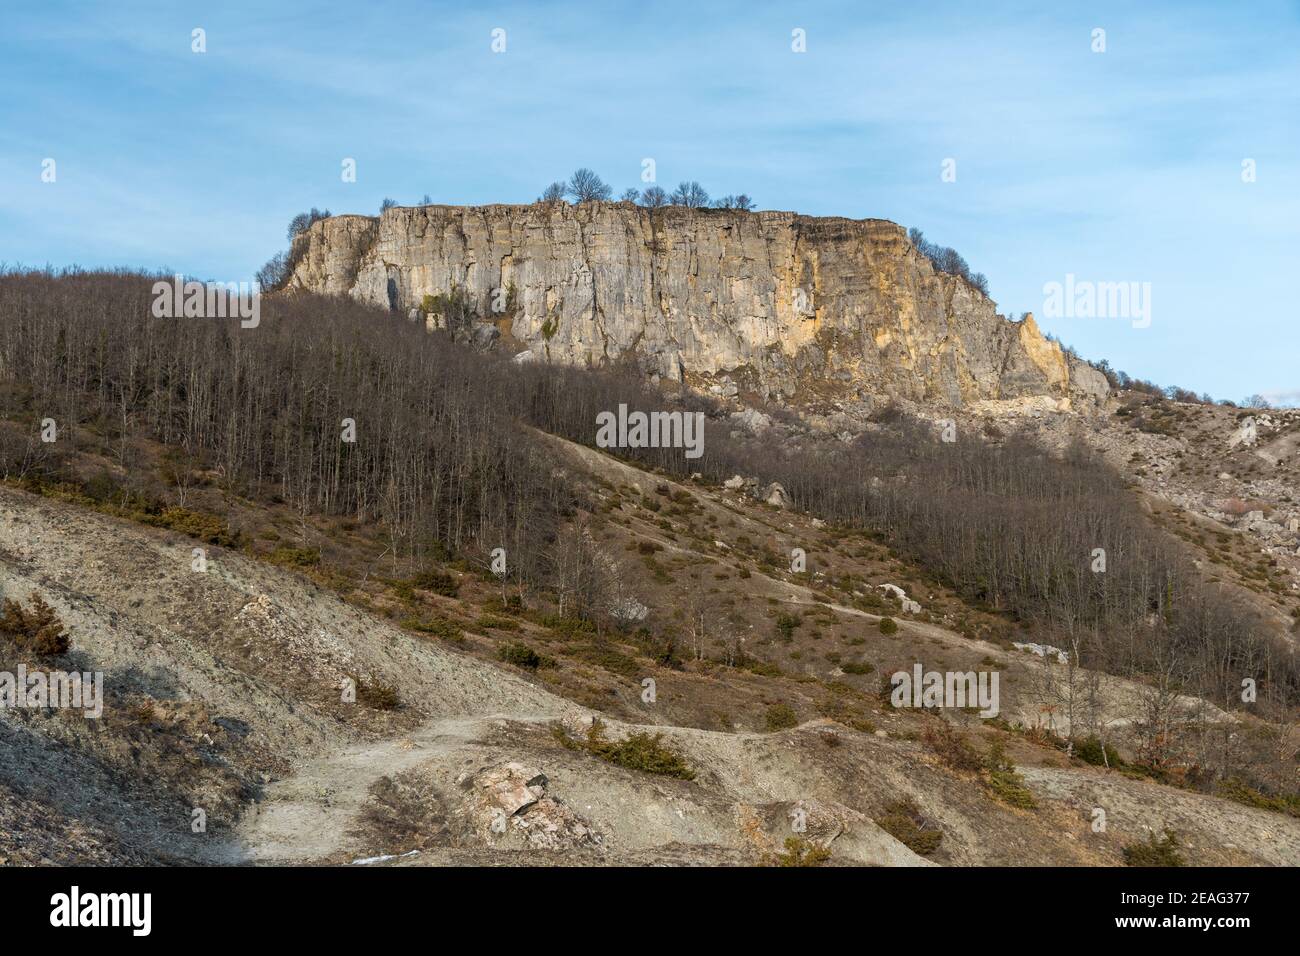 Mountain called Sasso Simone at the boundary of Tuscany, Emilia Romagna and Marche regions, during the winter Stock Photo